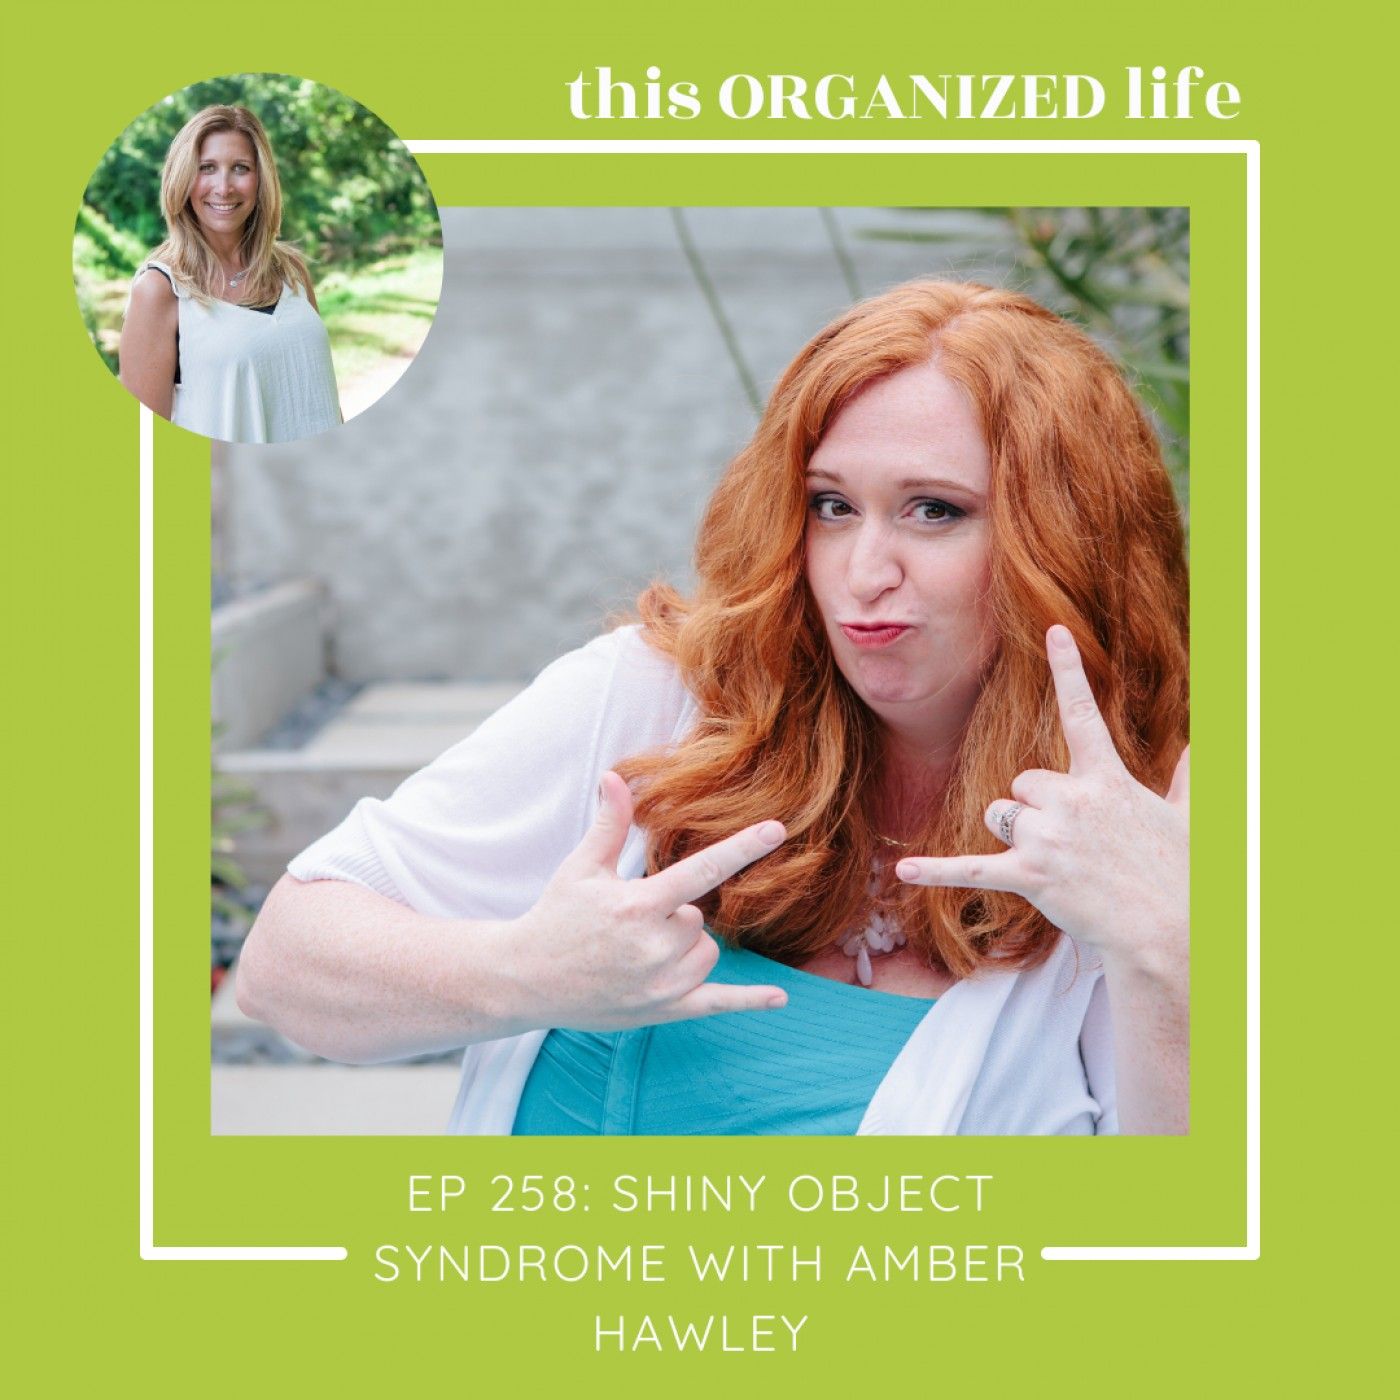 ep 258: Shiny Object Syndrome with Amber Hawley